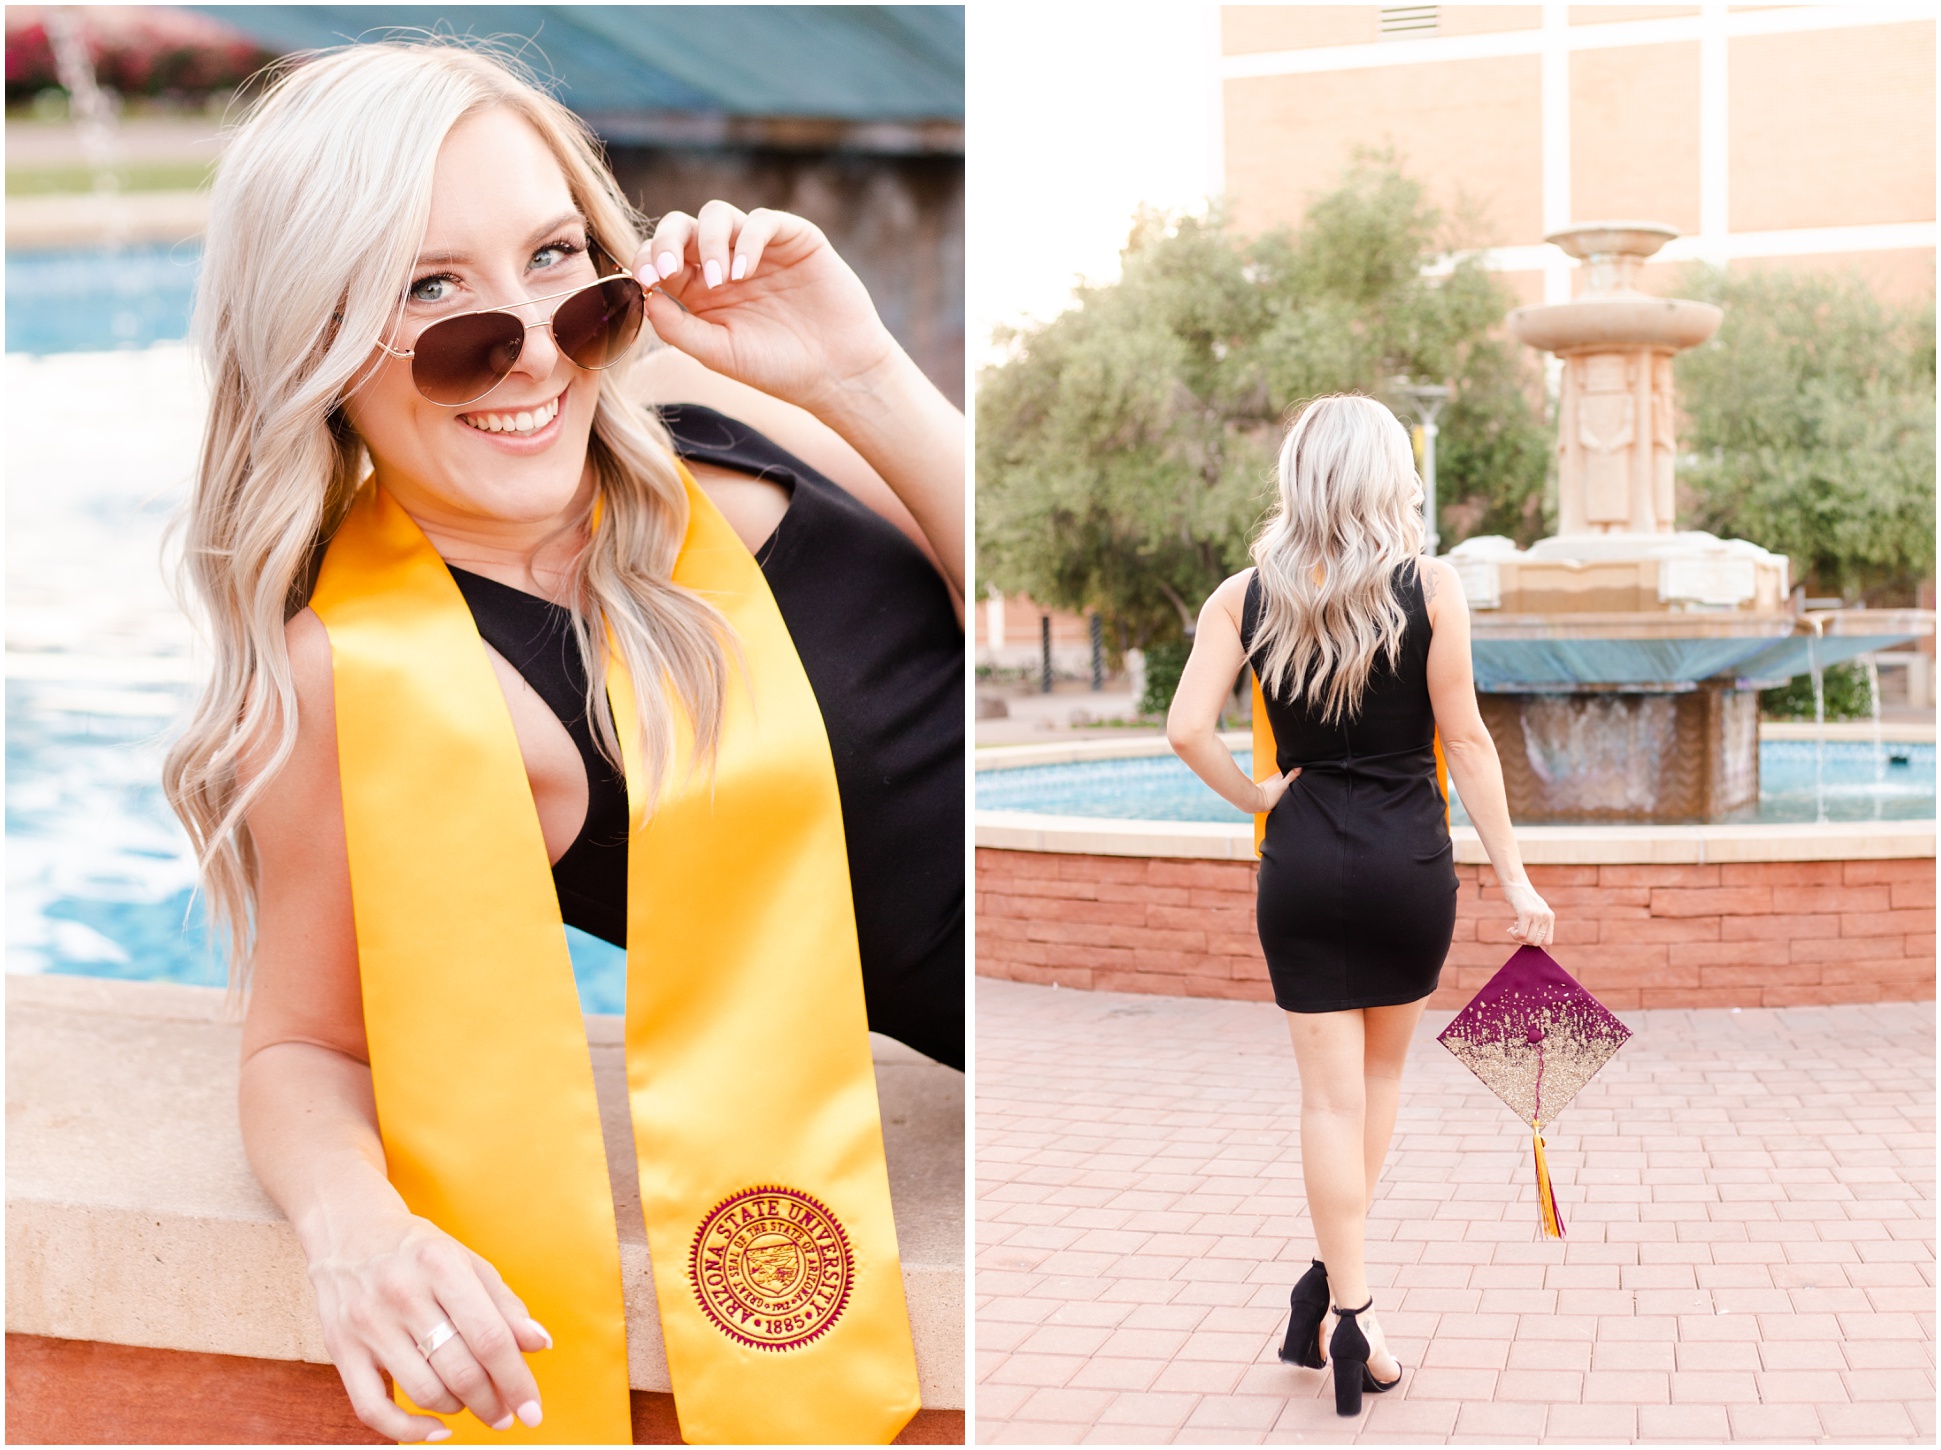 Left: Kaitlynn looking over her glasses, Right: Kaitlynn holding her cap in her hand facing the fountain